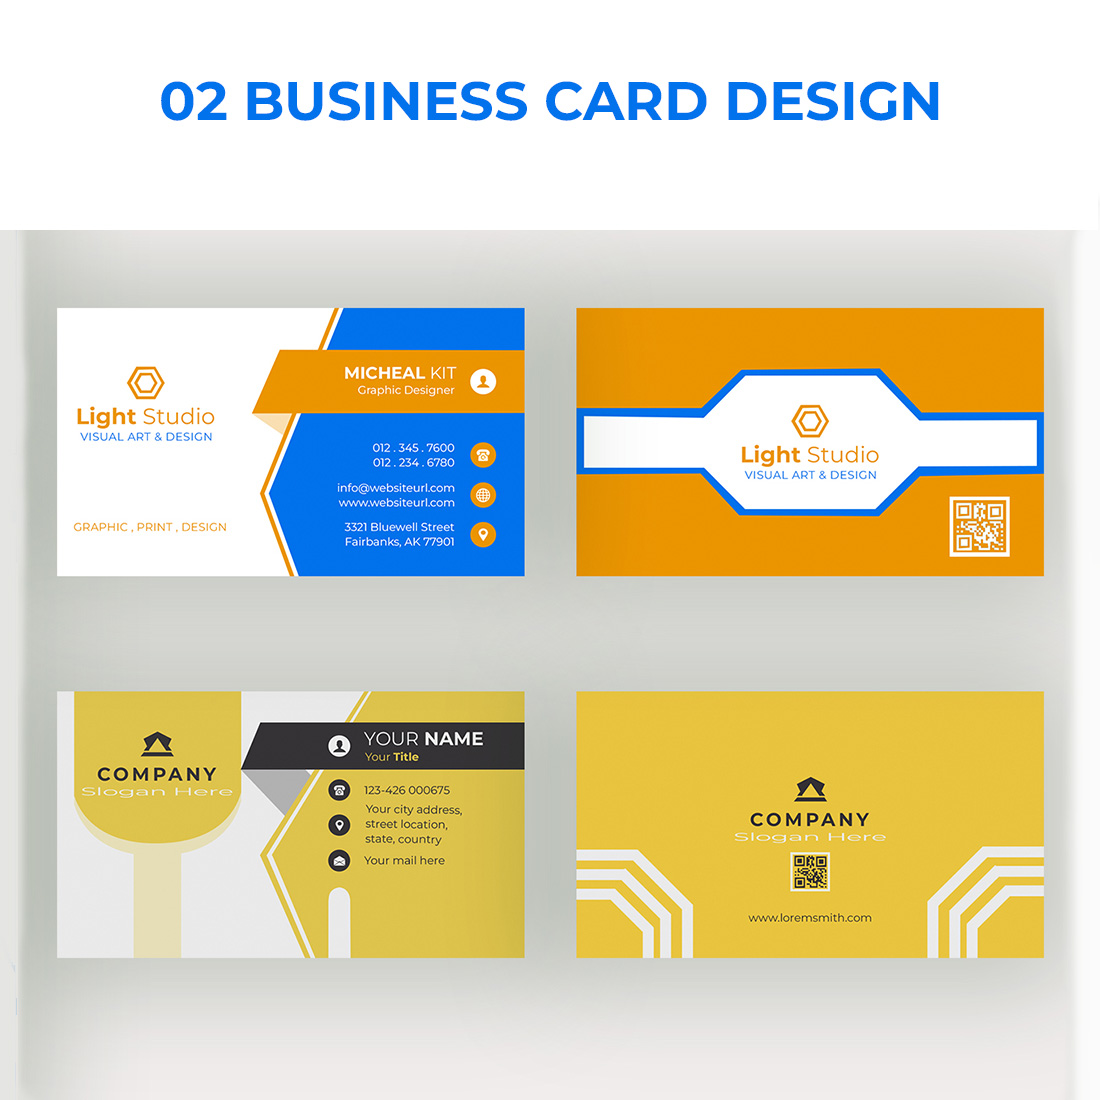 Professional Business Card Design Templates cover image.